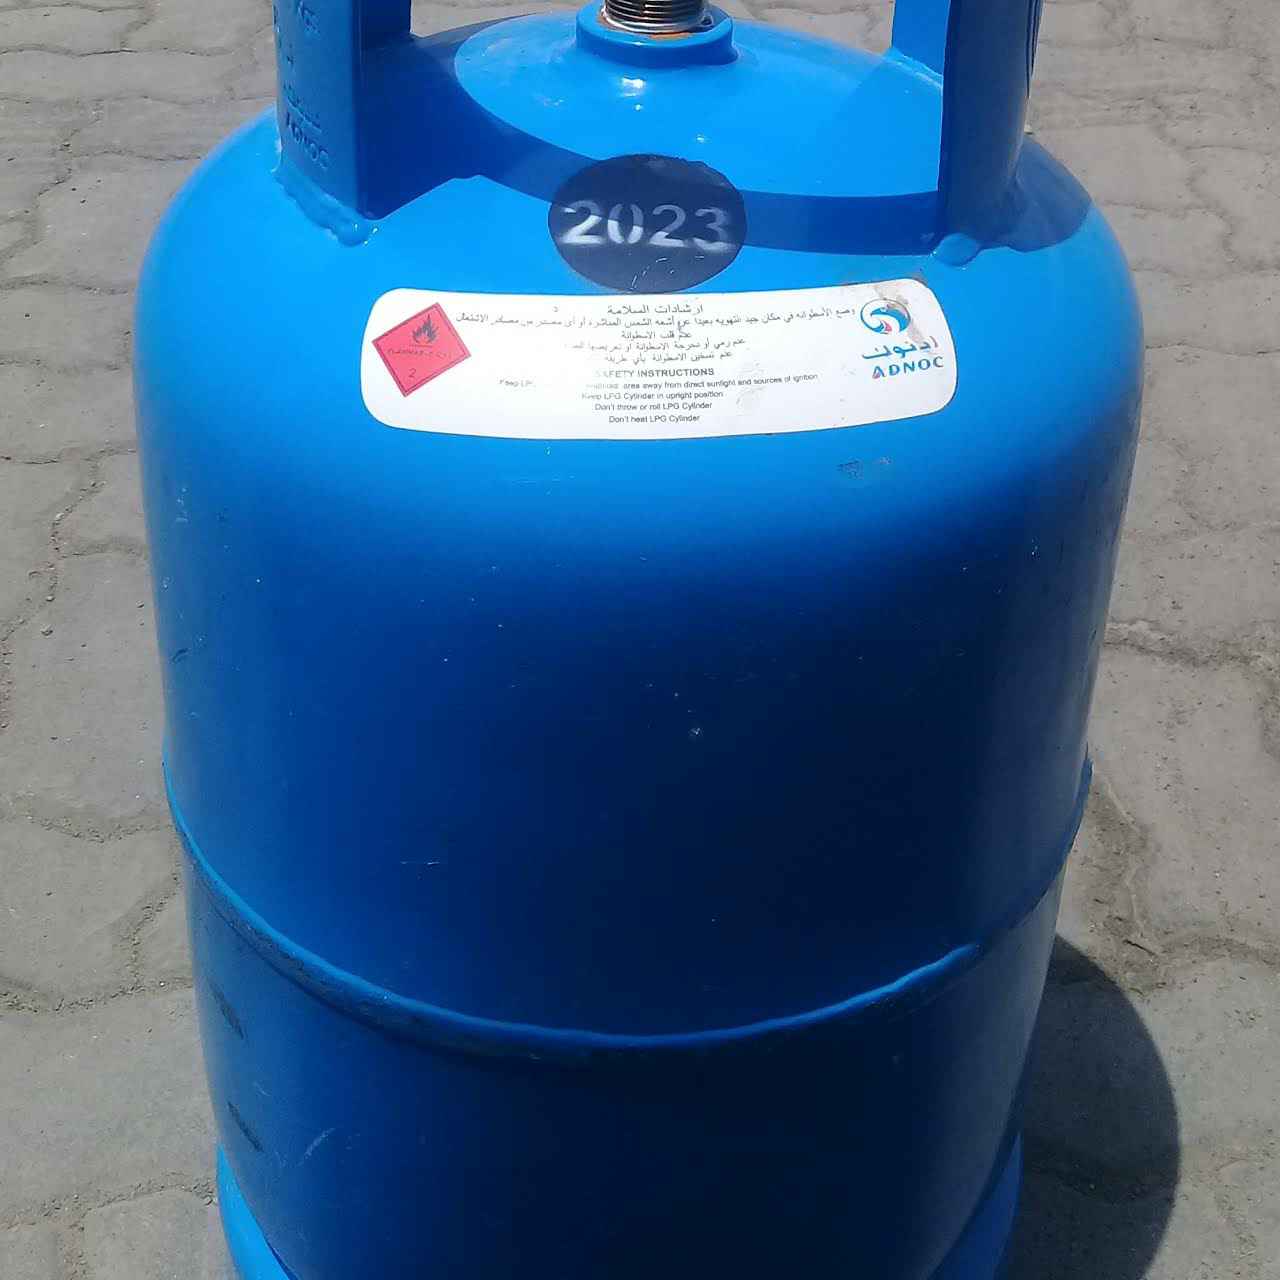 Cooking gas price in Nigeria